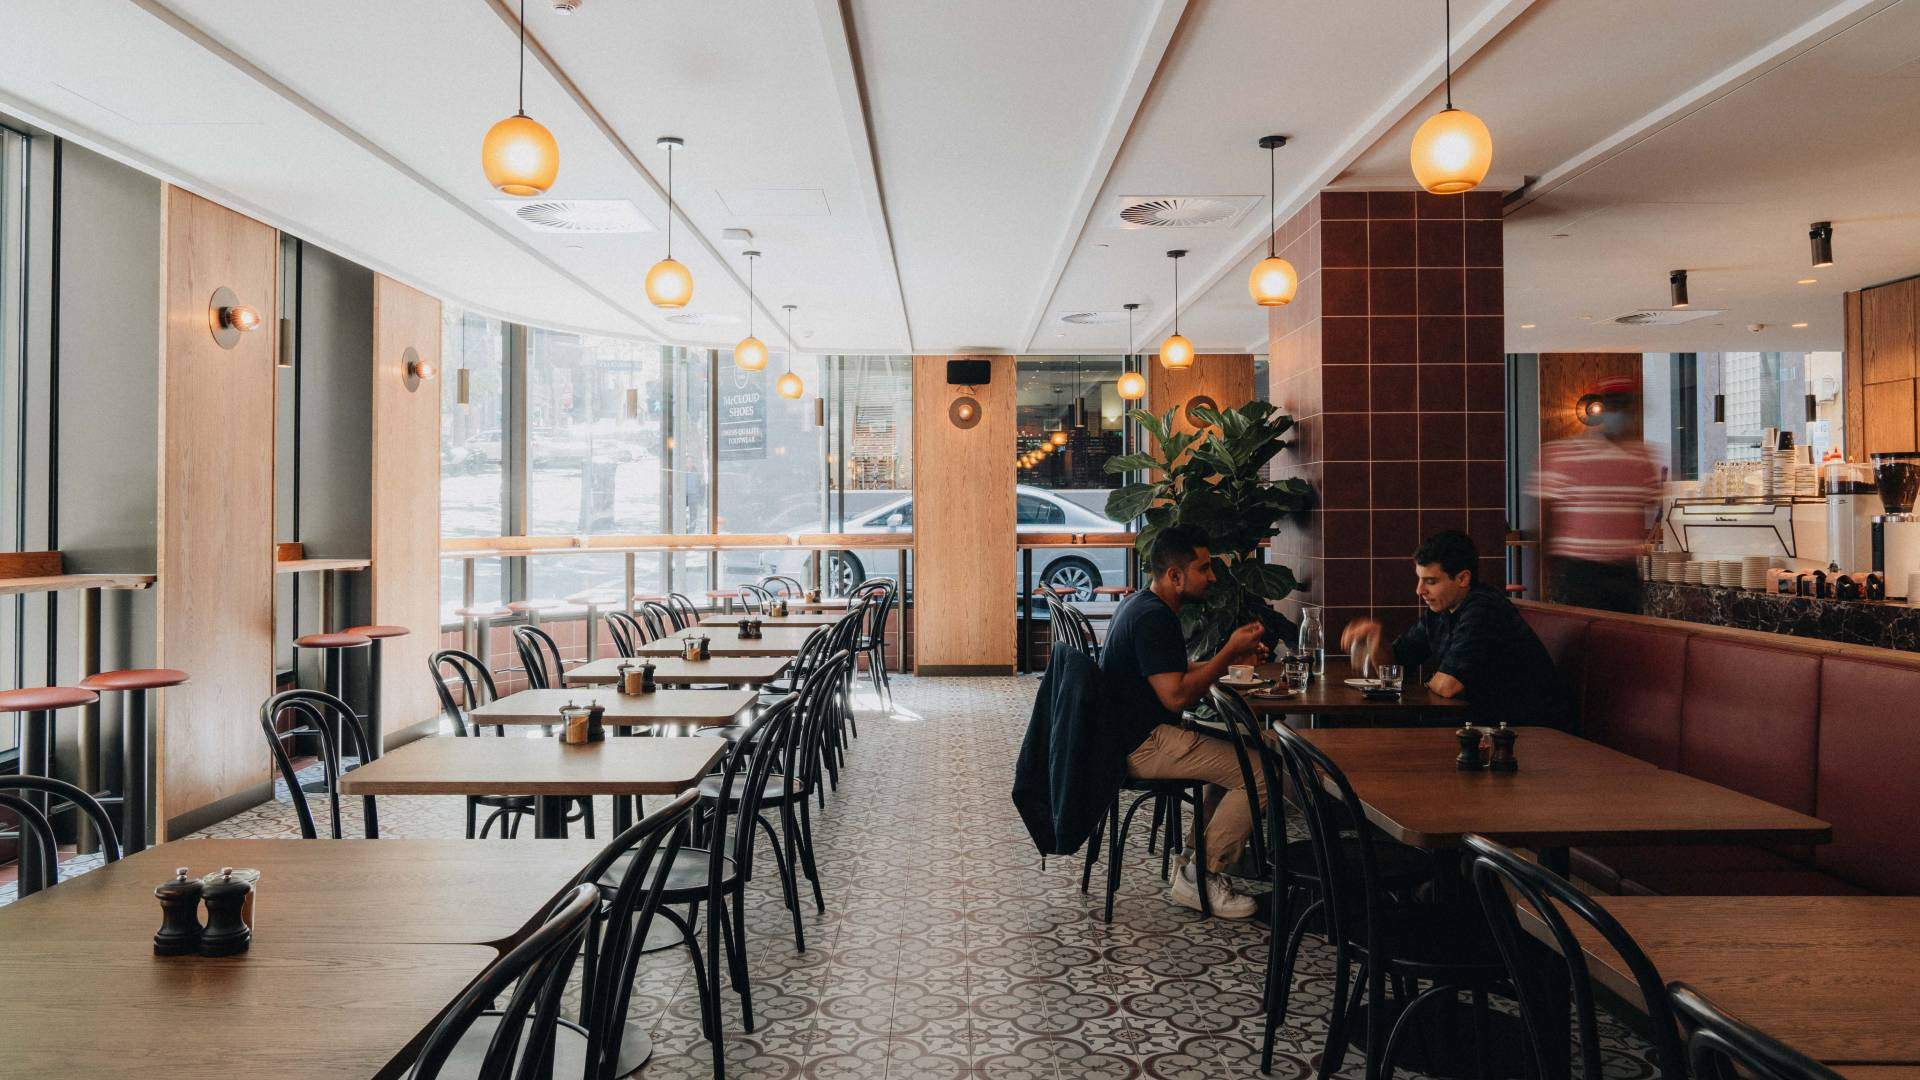 Beloved Bakery Chain Rustica Has Opened Another Go-To Brunch Venue in the Melbourne CBD